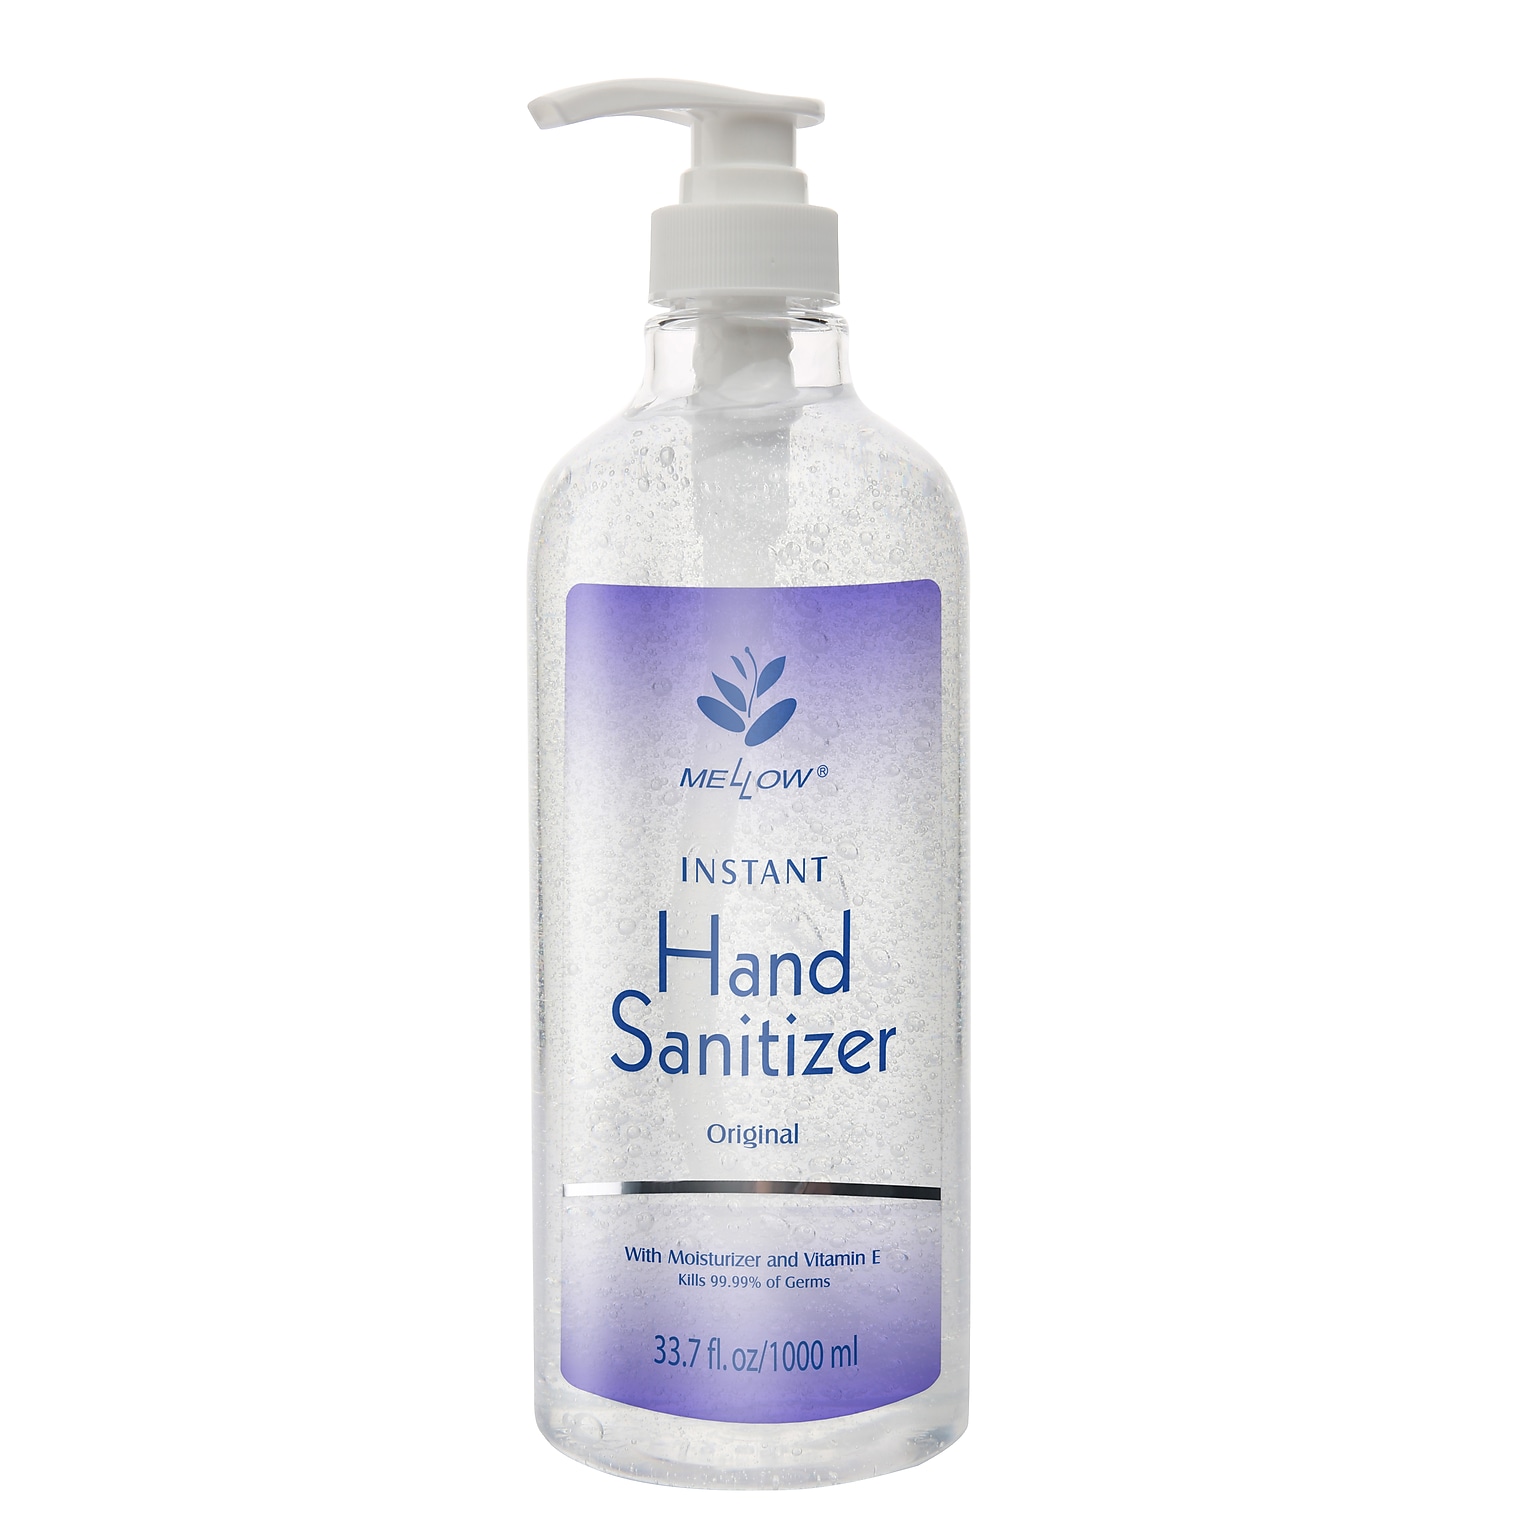 33.7-Oz Mellow 62% Ethyl Alcohol Gel Hand Sanitizer with Moisturizer and Vitamin E $1.29 or less w/ SD Cashback at Staples w/ Free Store Pickup